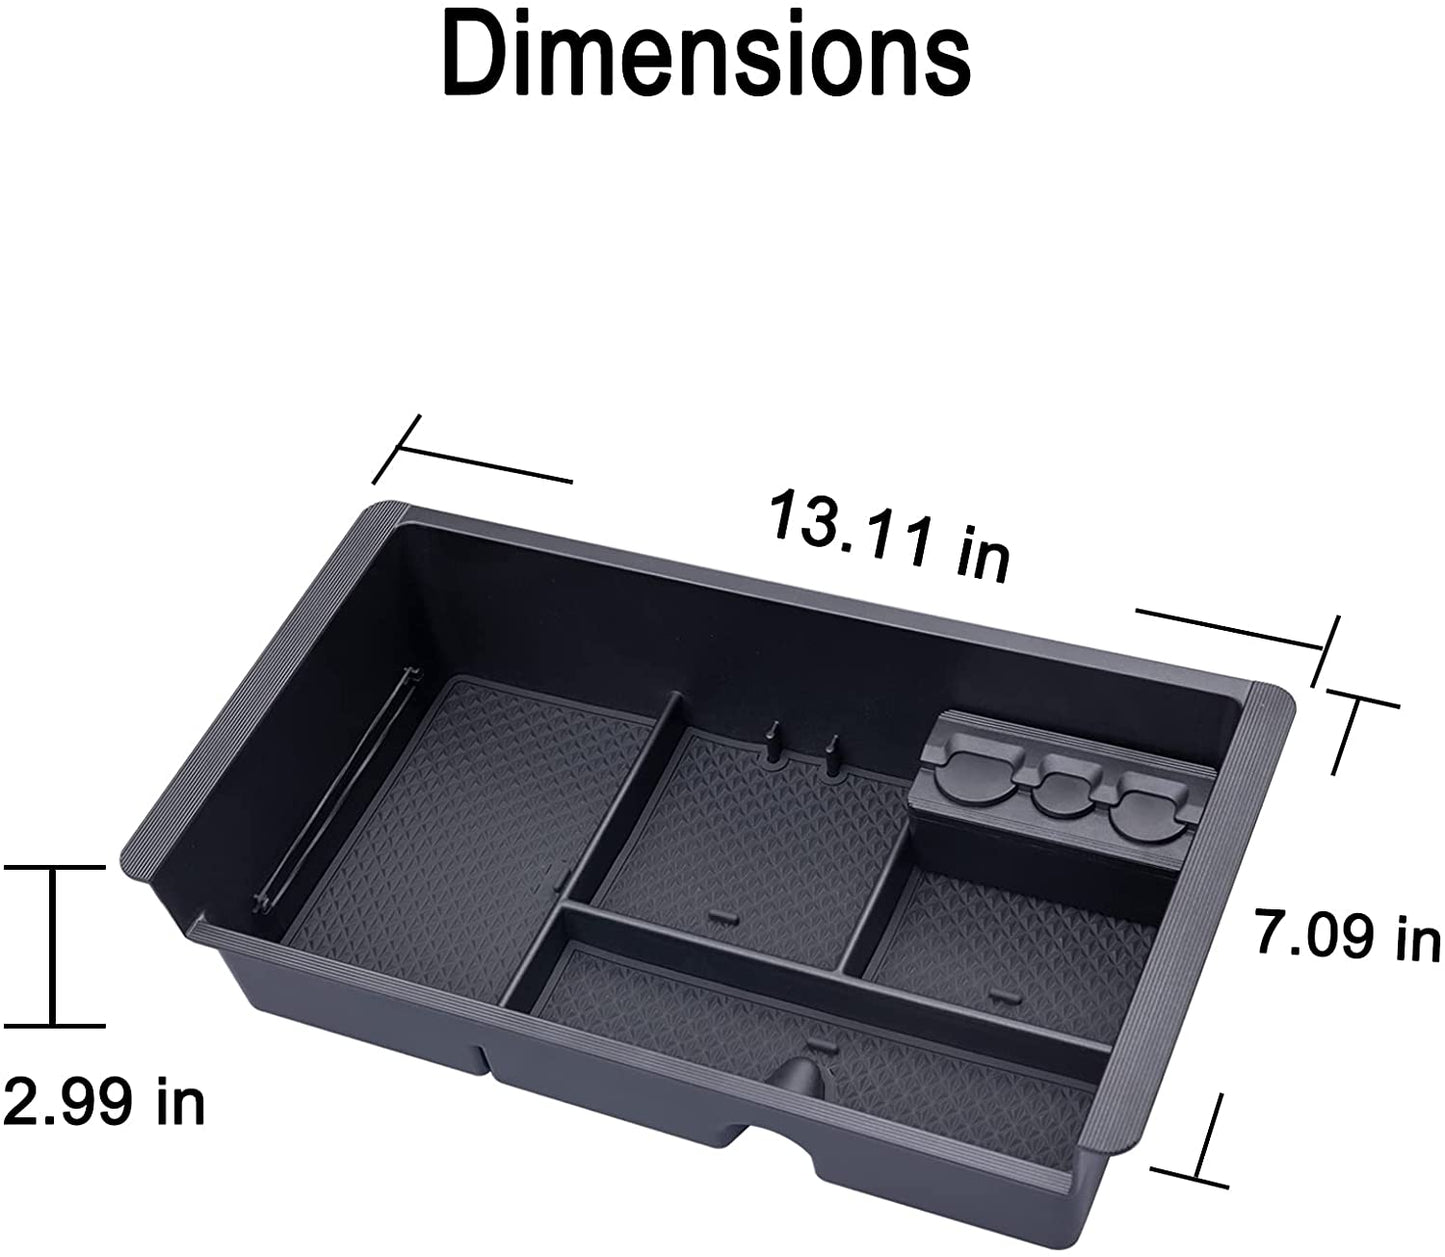 Compatible with Chevy Silverado/GMC Sierra 2014-2018 and Chevy Tahoe Suburban/GMC Yukon 2015-2020 Center Console Organizer Tray Accessories-Full Console w/Bucket Seats ONLY - (Black Trim)